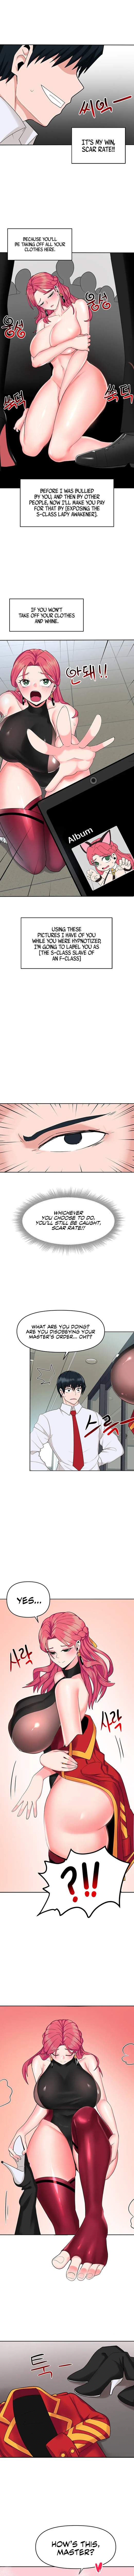 The Hypnosis App was Fake - Chapter 2 Page 11